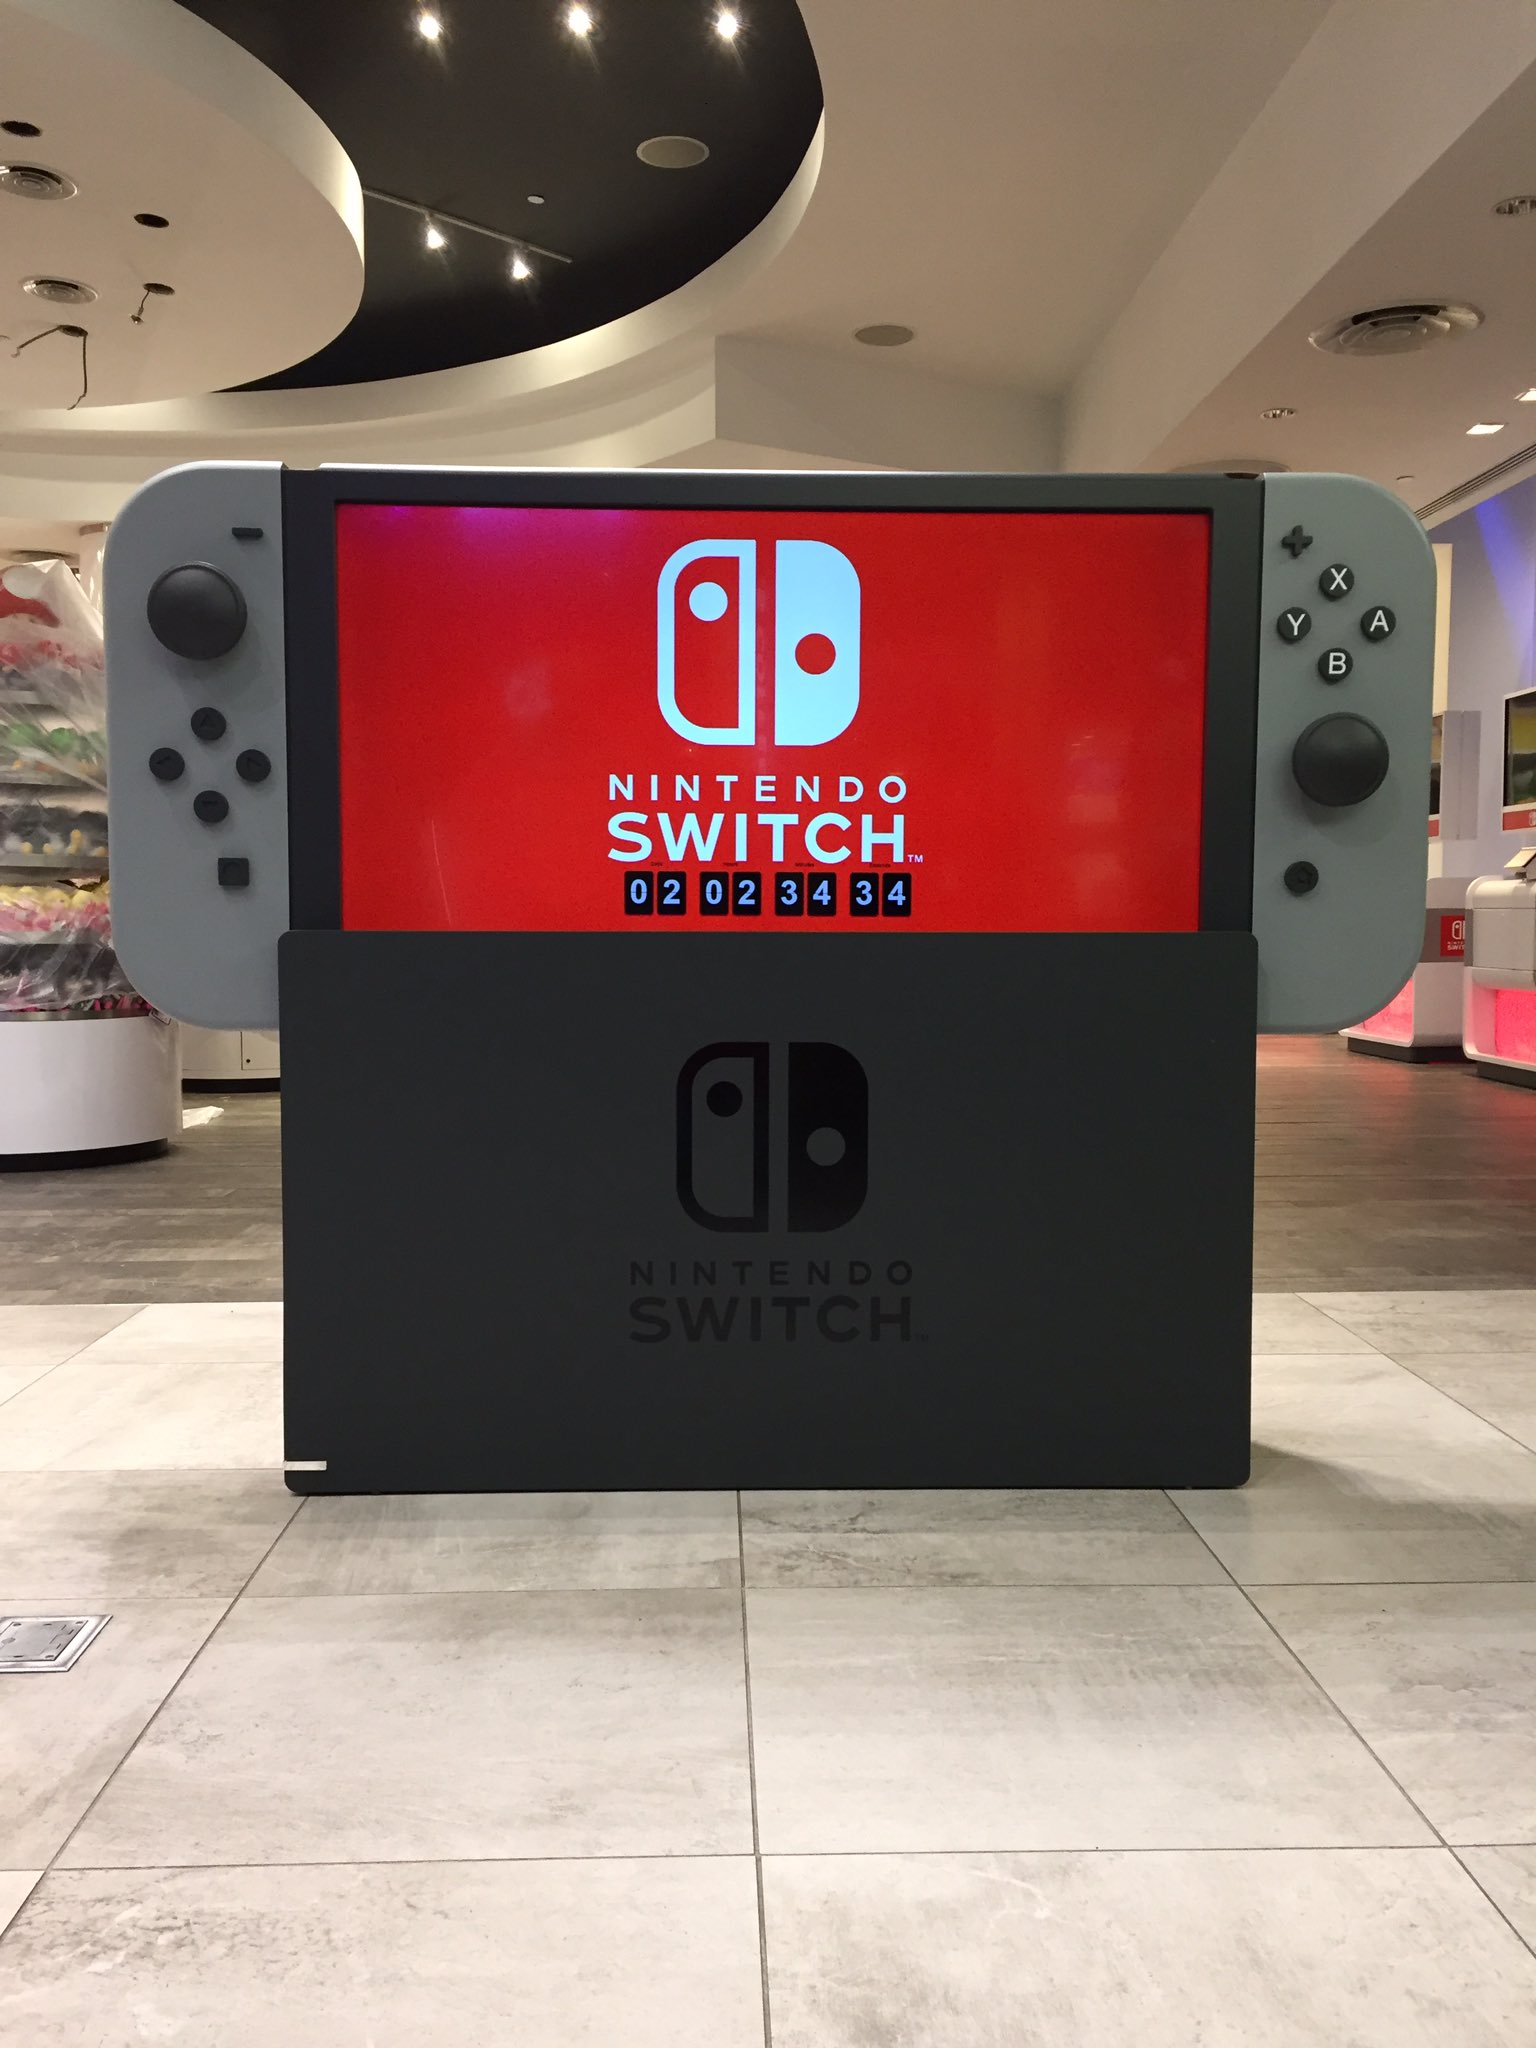 Merchandiser for eksempel slå Nintendo NY on Twitter: "The countdown has begun for the #NintendoSwitch  midnight launch at #NintendoNYC! Get excited! https://t.co/obaDobys3B" /  Twitter